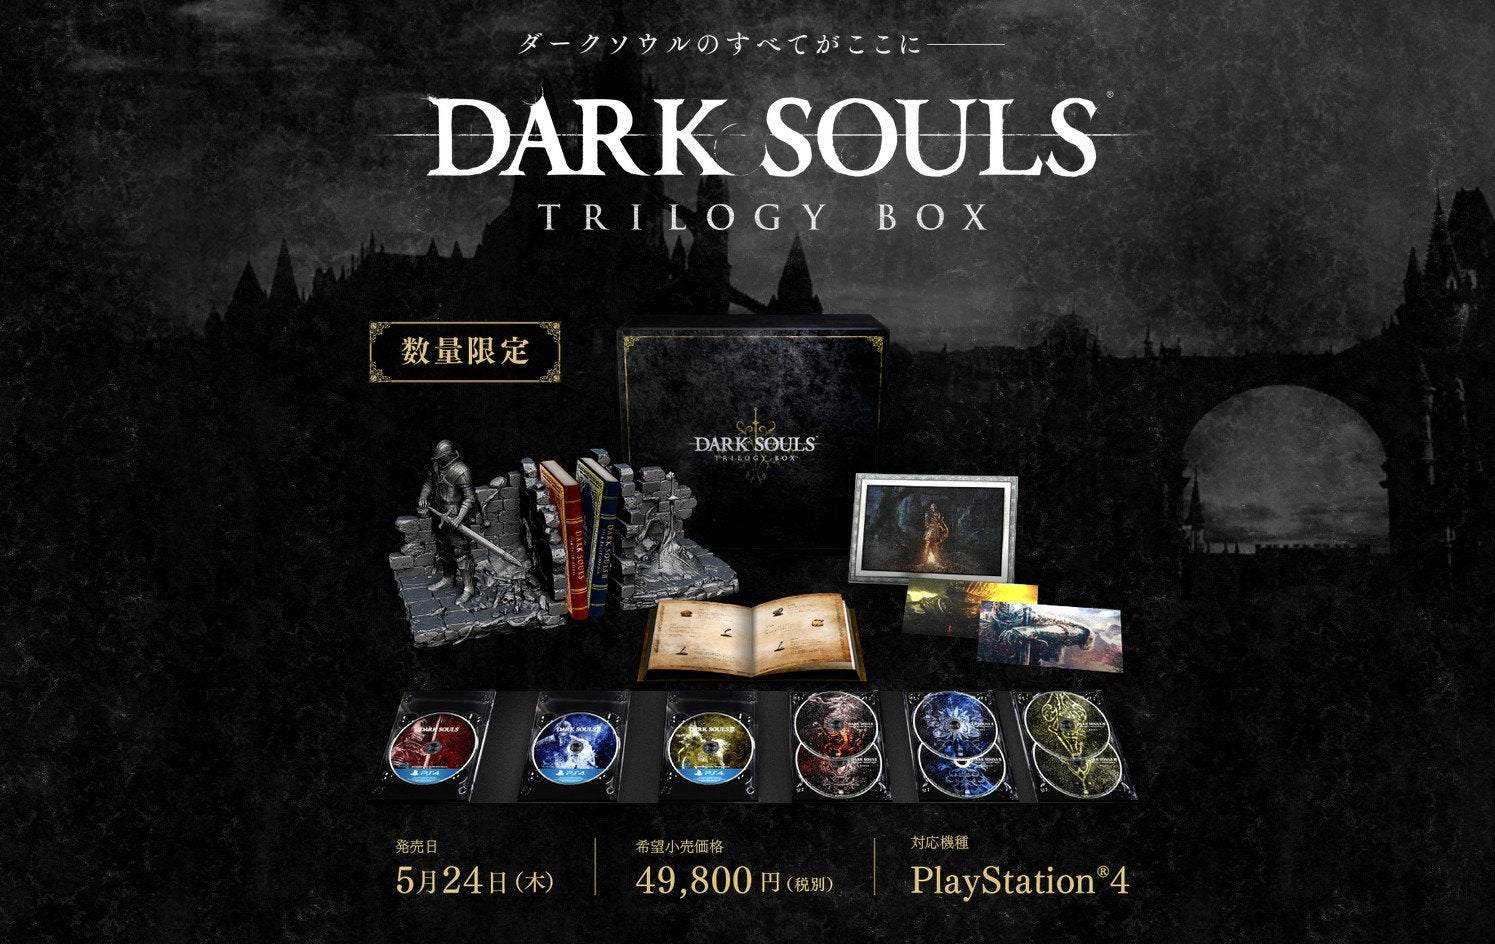 This Dark Souls Trilogy Box Set announced for Japan is rather cool 